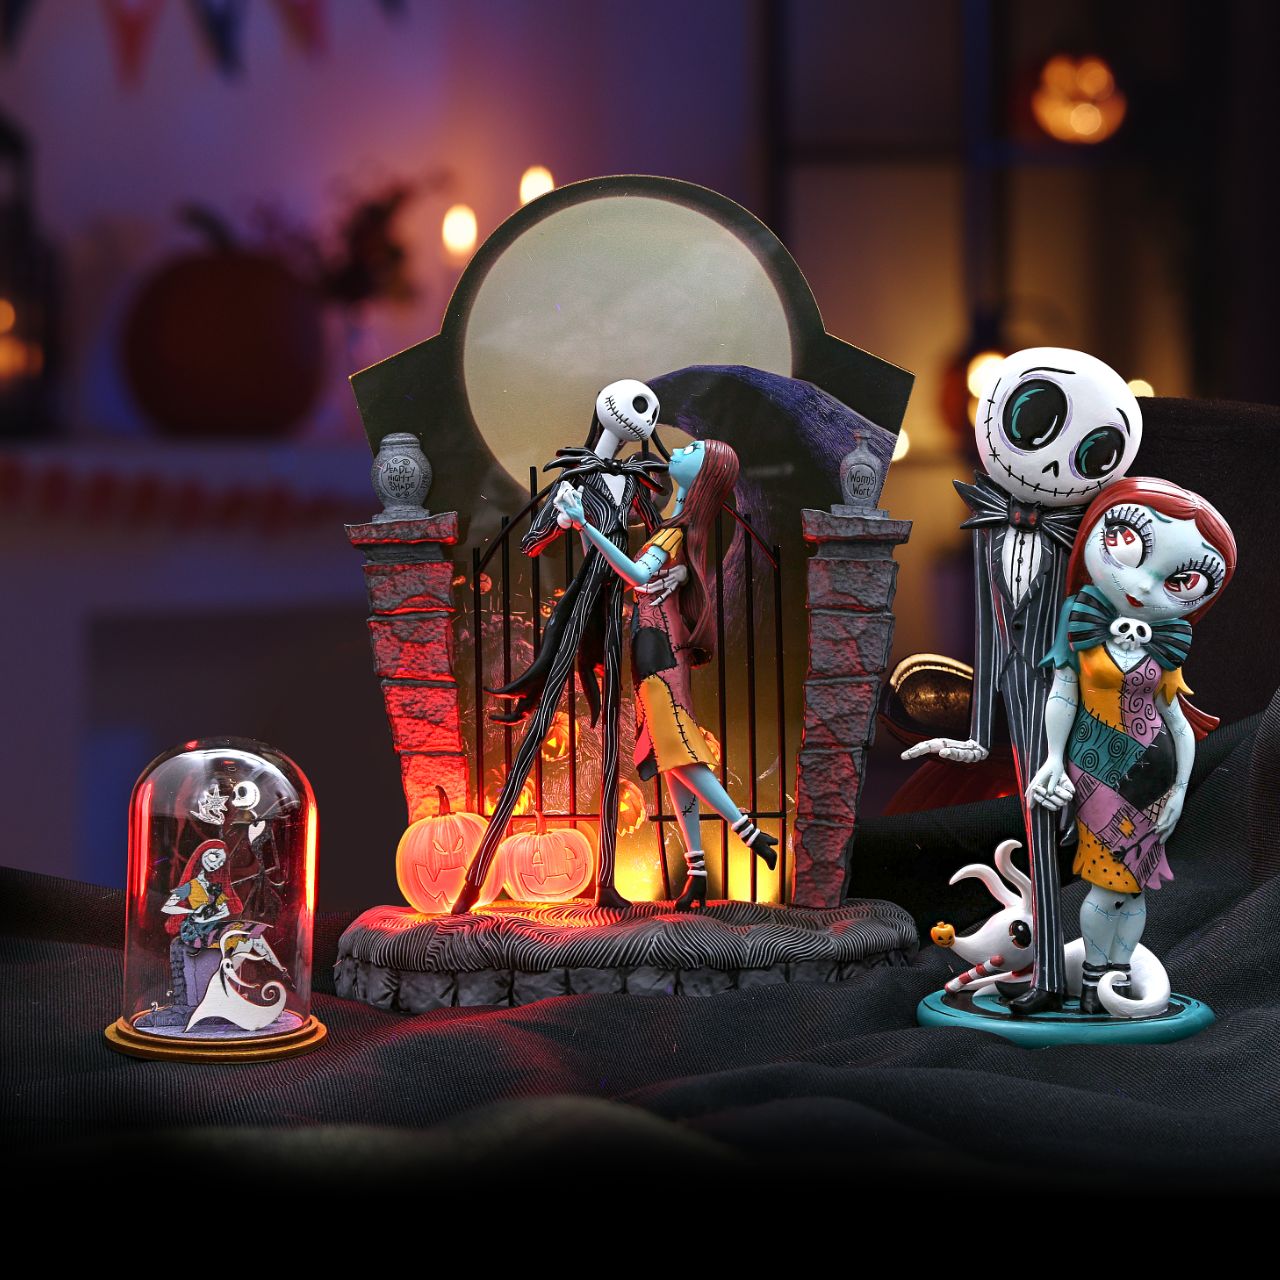 Will Sally the ragdoll's love change Jack Skellington's mind about taking over Christmas? This is a sweet pair with Zero make the perfect gift for any Halloween Town fan. This classic Nightmare Before Christmas decorative Kloche will make a stunning display in any home.